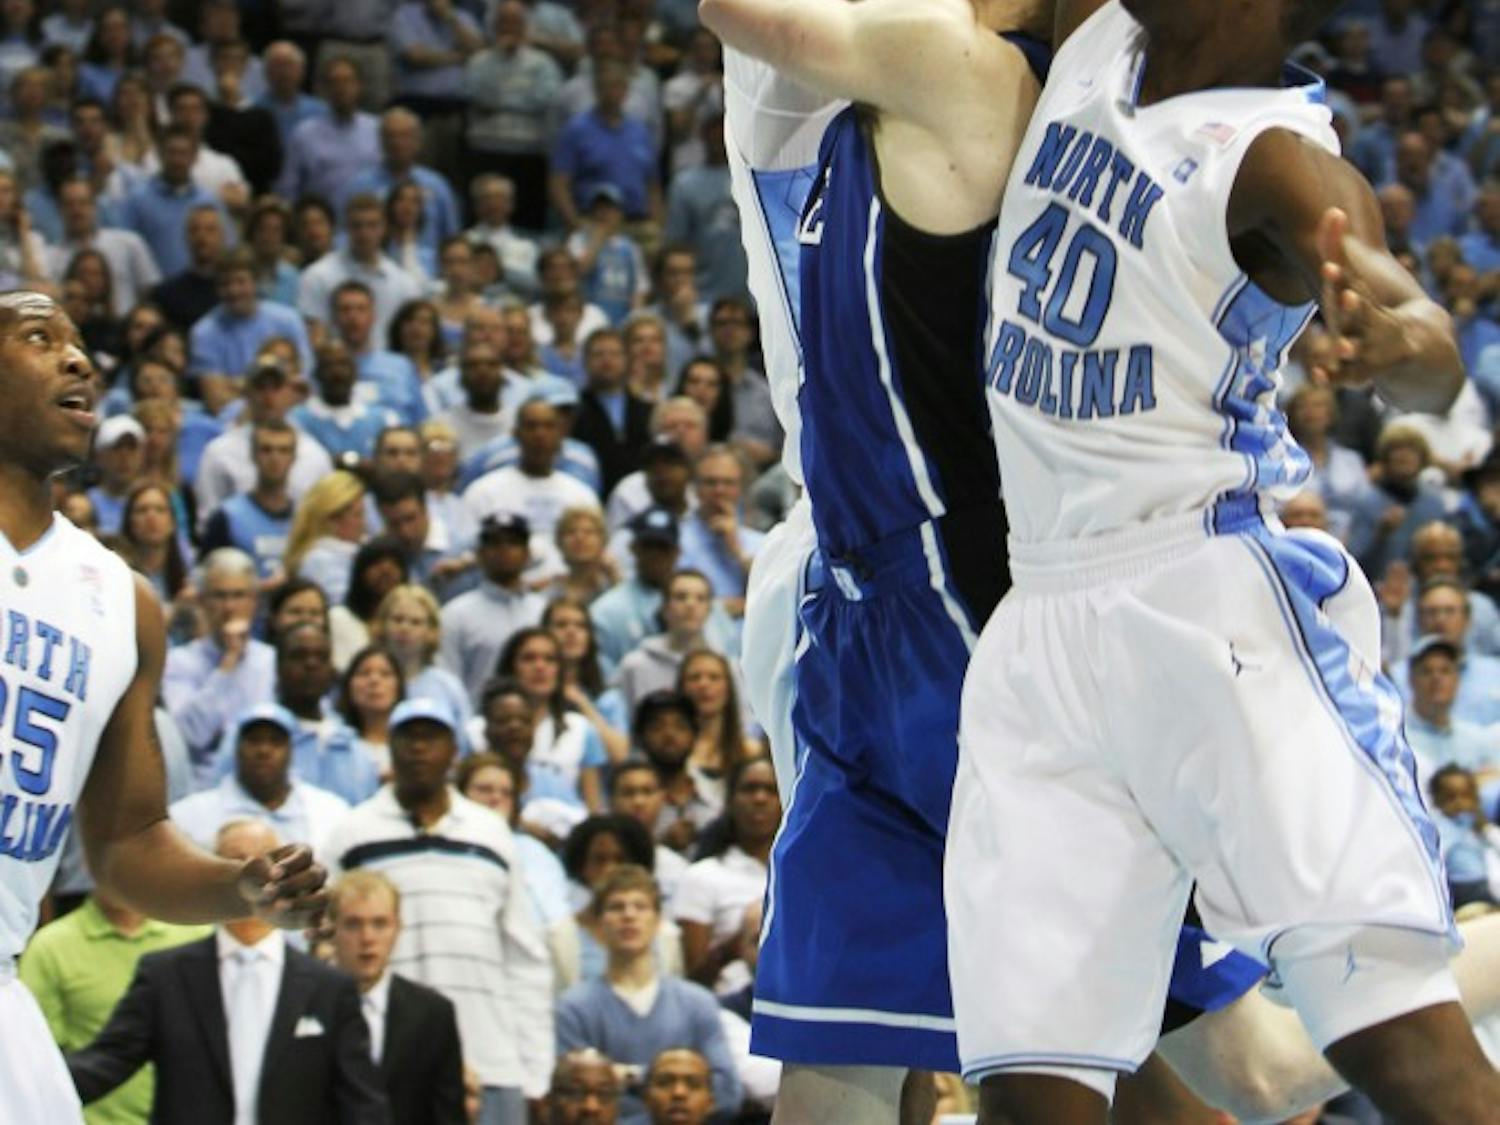 	UNC defeated the Duke University Blue Devils 81-67 in Chapel Hill on Saturday, March 5. With their win, the Tar Heels became the outright regular season ACC champions.